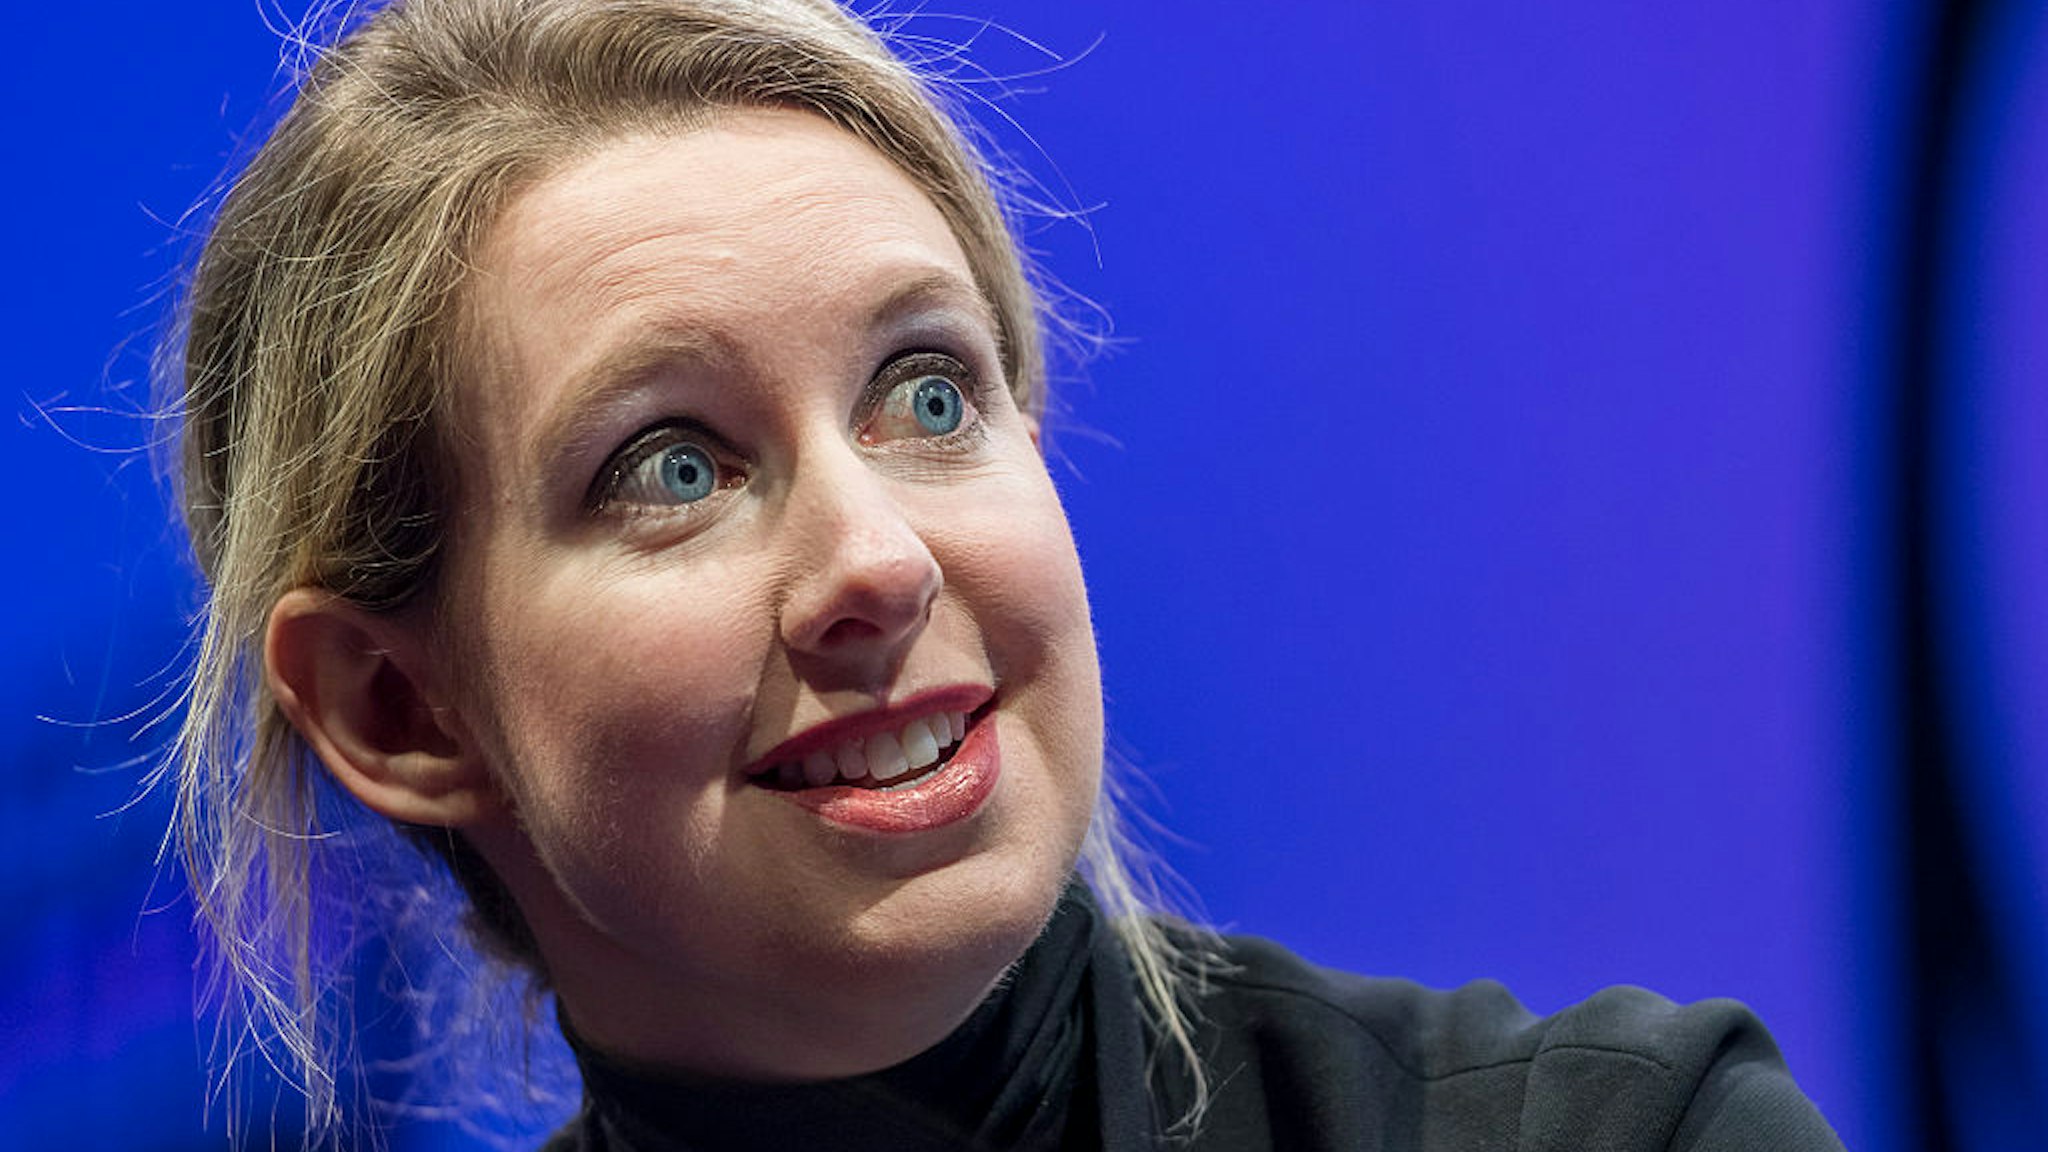 Elizabeth Holmes, founder and chief executive officer of Theranos Inc., speaks during the 2015 Fortune Global Forum in San Francisco, California, U.S., on Monday, Nov. 2, 2015.